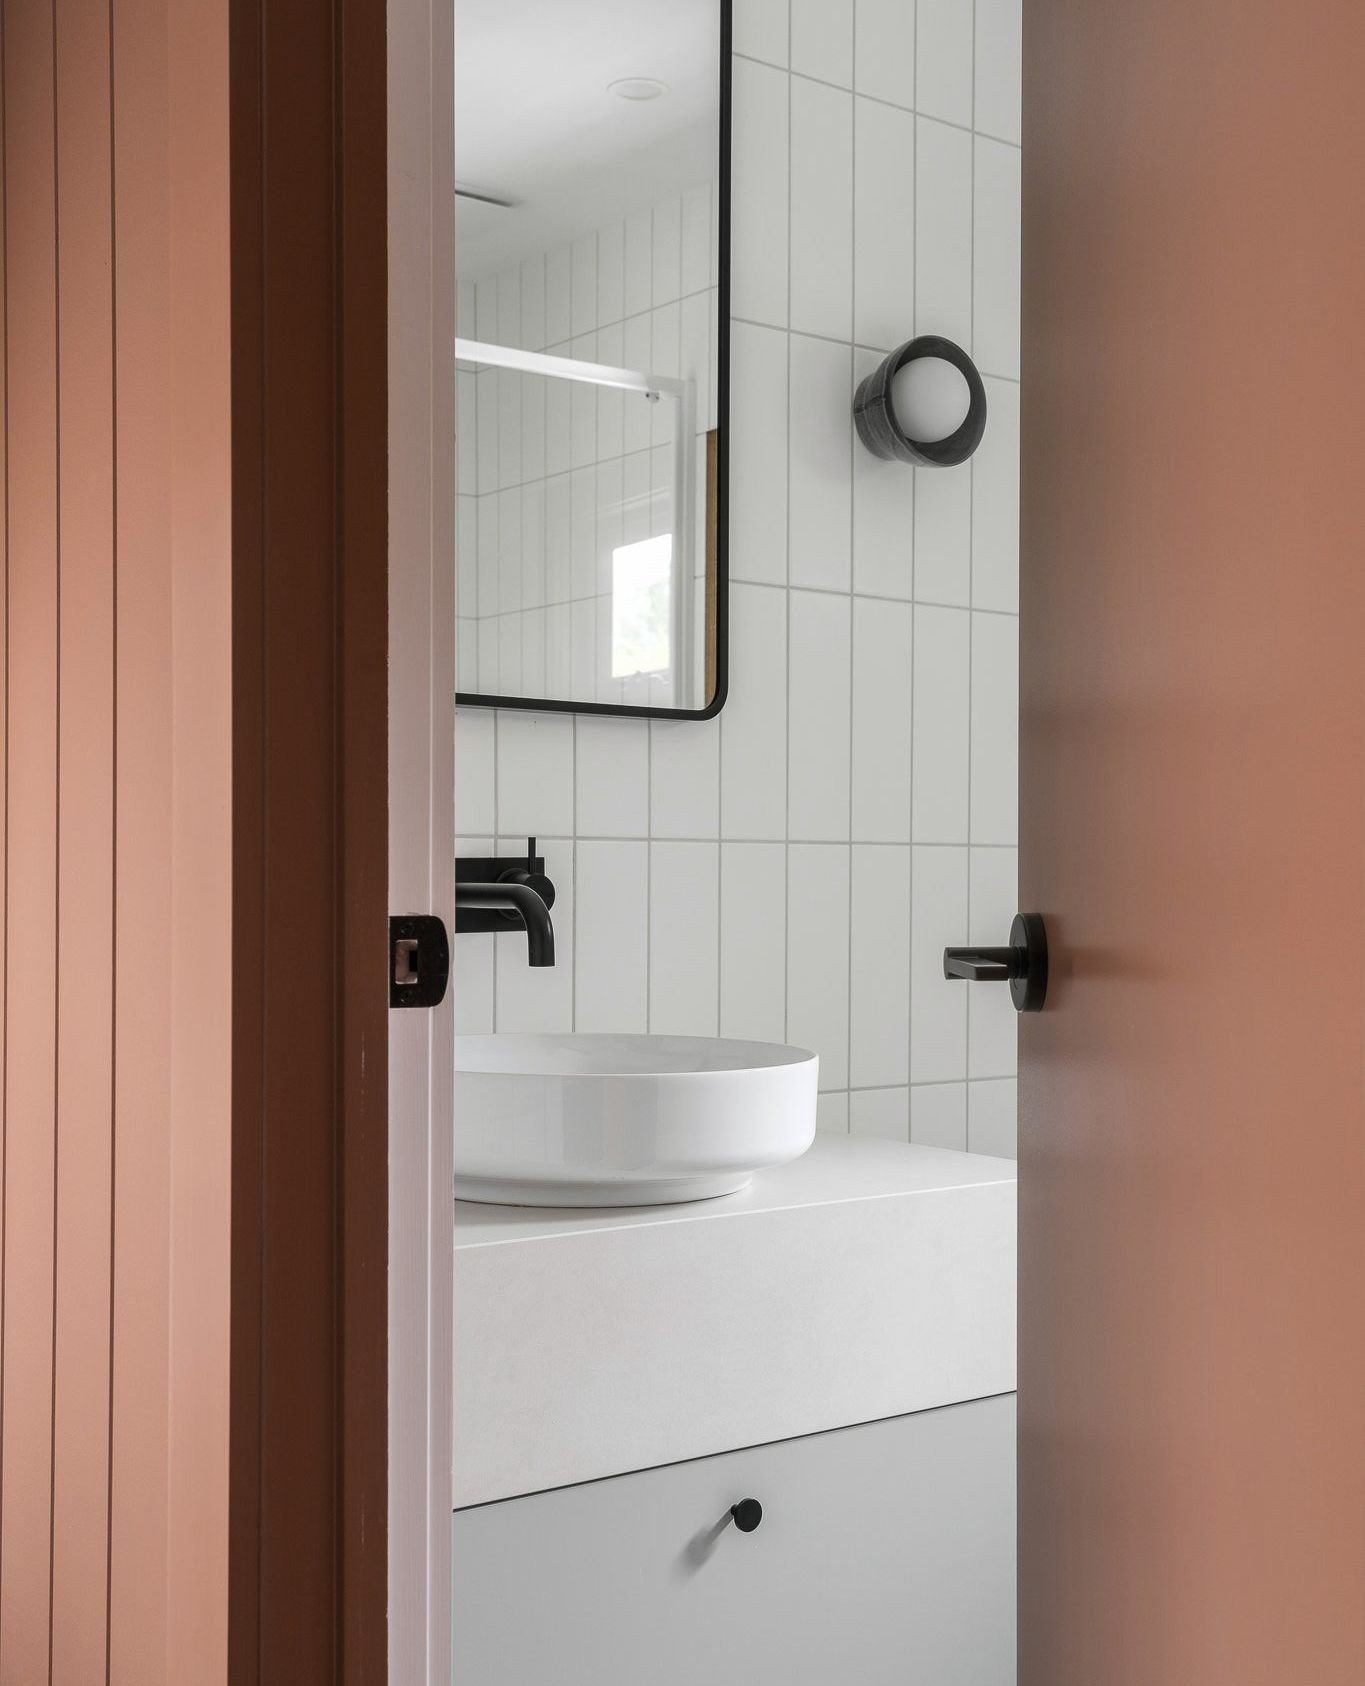 Sunday night sneak peek of the pale Spinifex-coloured vanity and ensuite from the Mystic suite at The Residence.⁠
⁠
Architect and material spec @bayleyward.architects⁠
Additional material specification and styling by @brittwhitestudio⁠
Pic by @threef